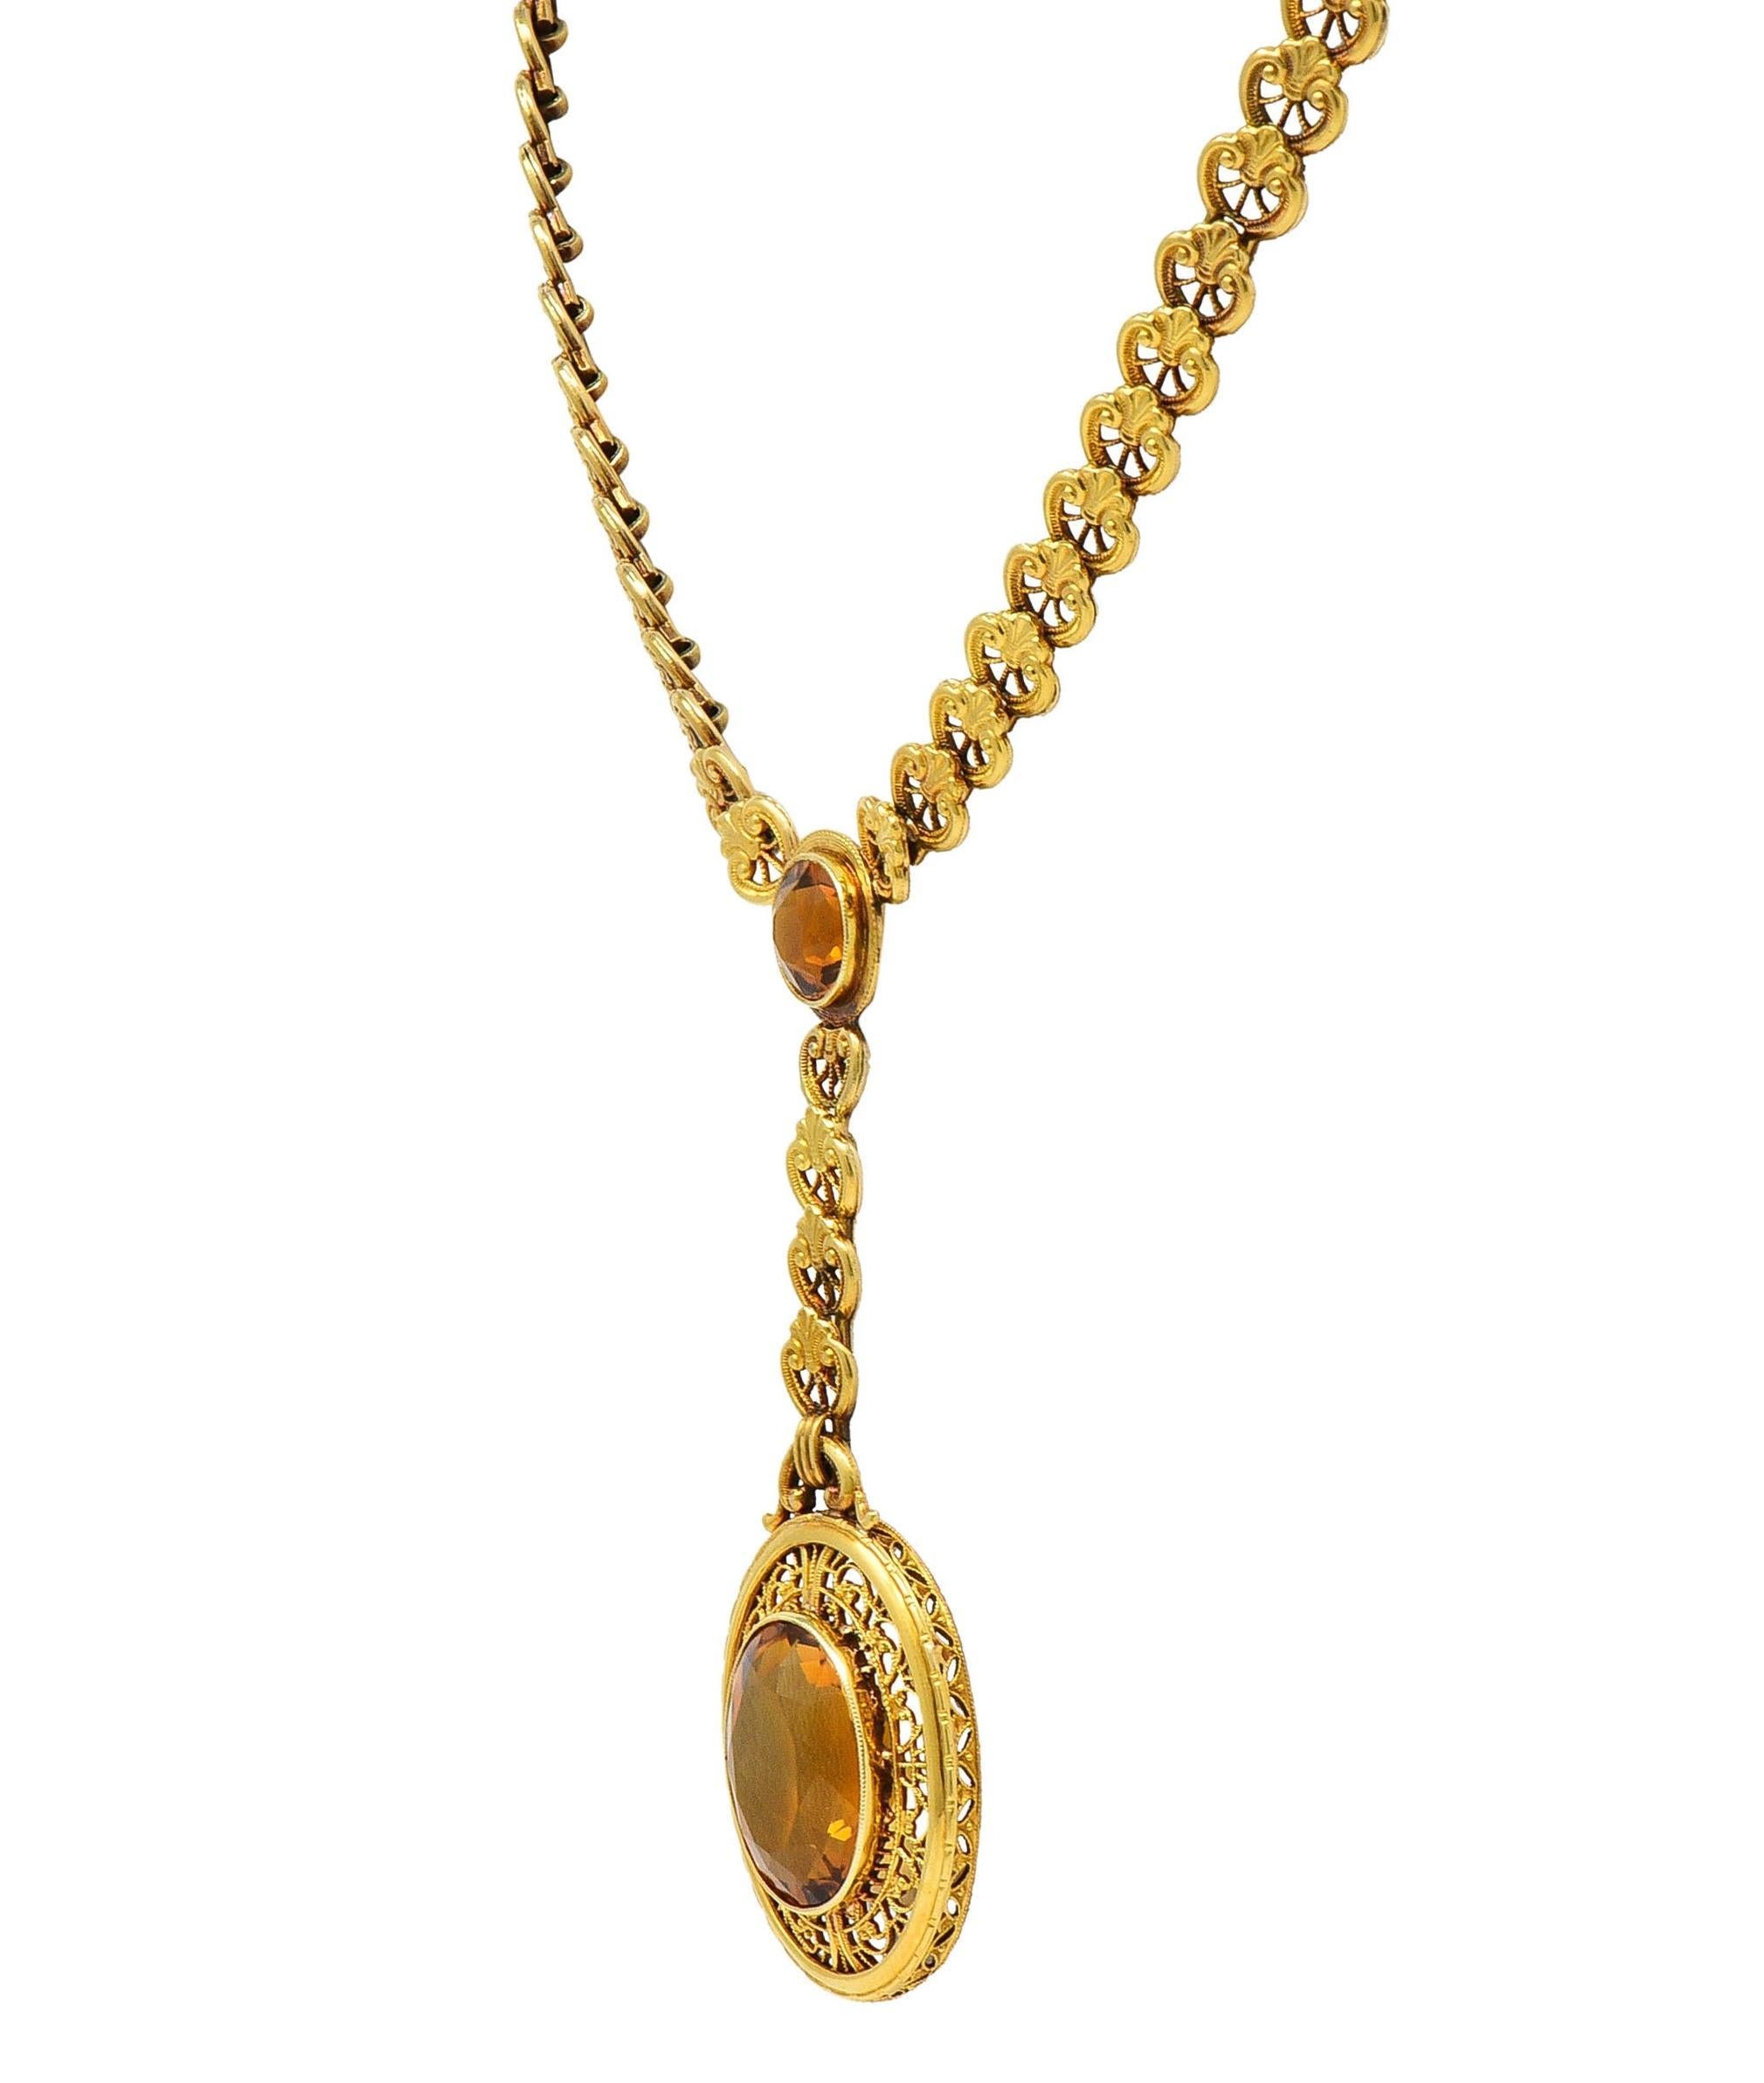 Art Deco Bippart & Co. Citrine 14 Karat Yellow Gold Antique Lotus Drop Necklace In Excellent Condition For Sale In Philadelphia, PA